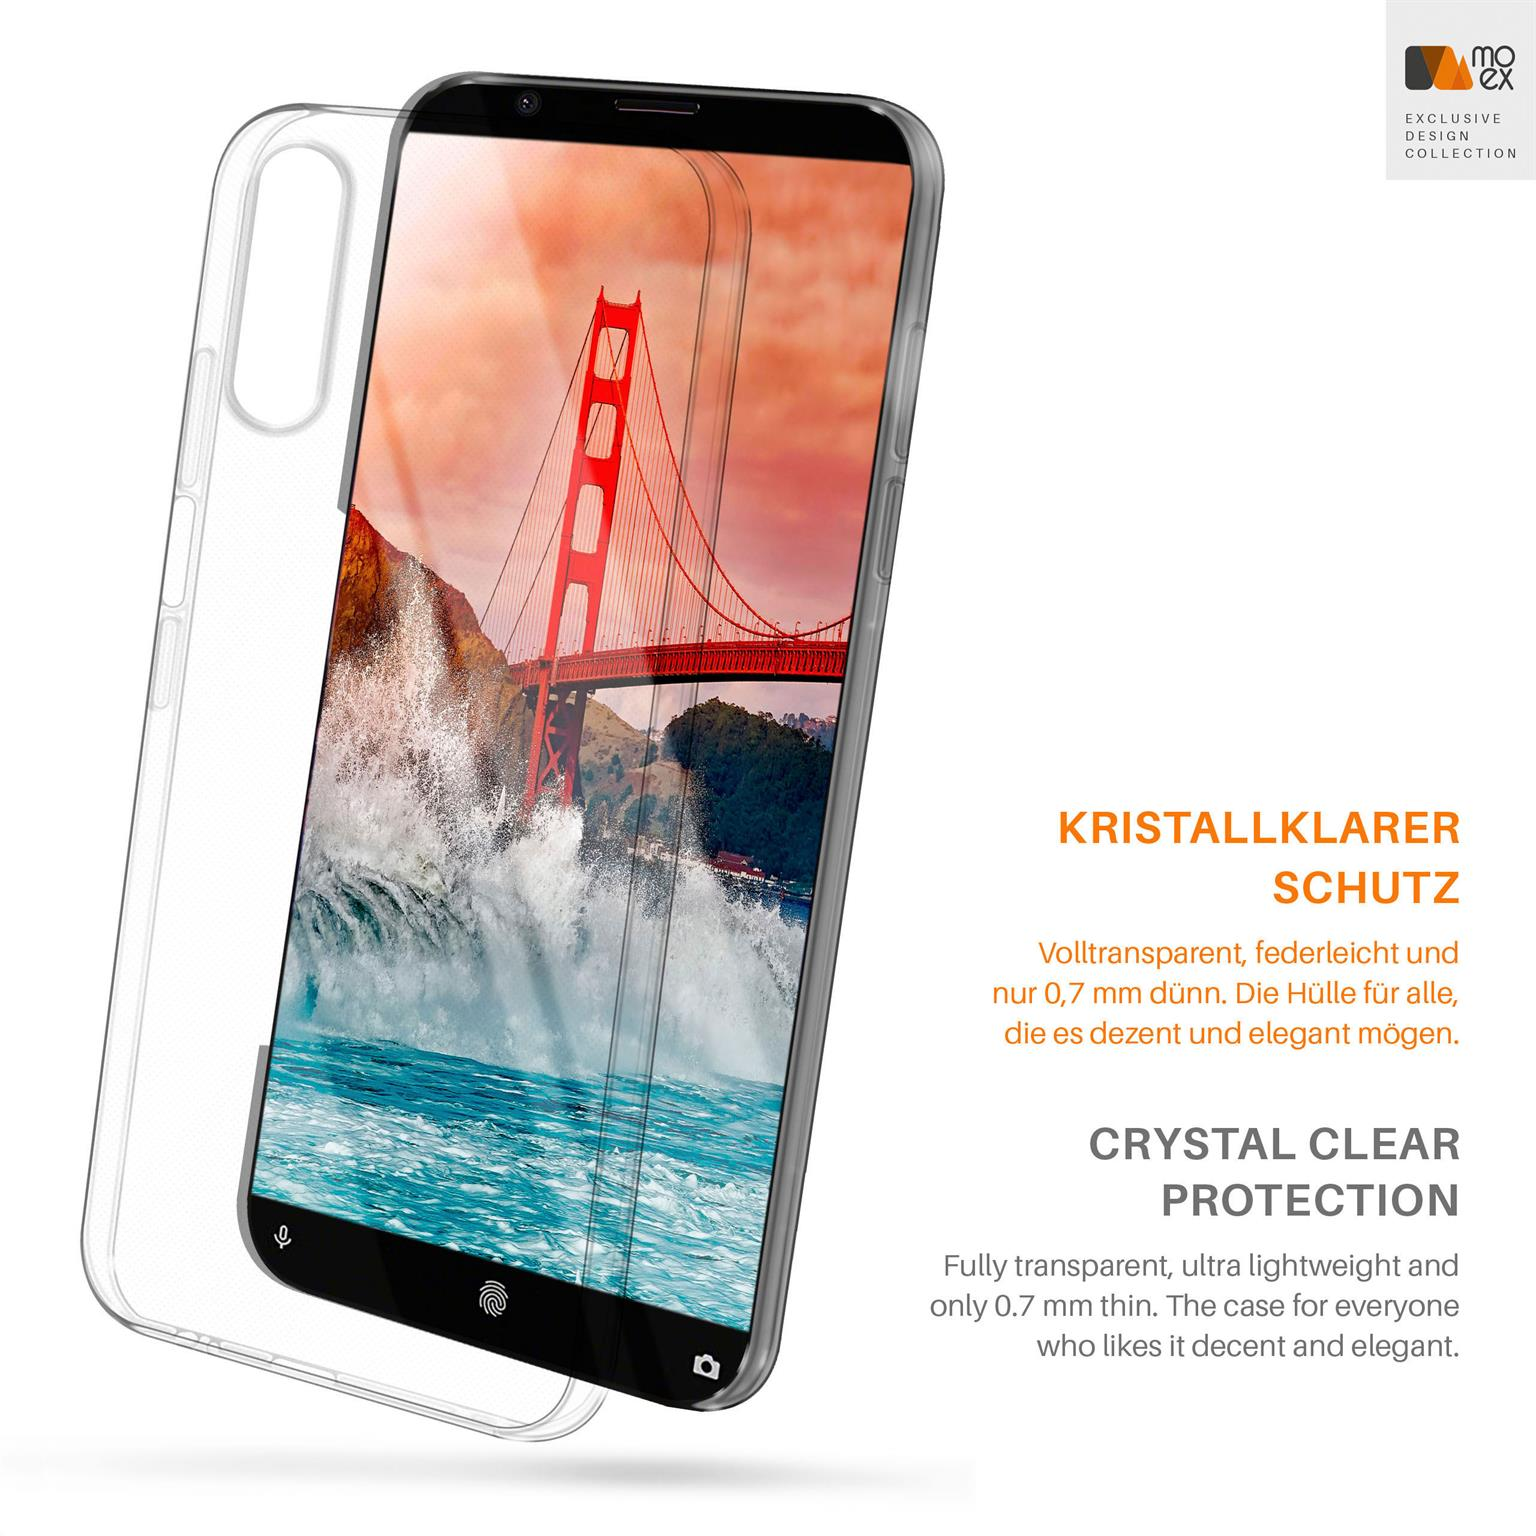 MOEX Aero Case, Xperia 5, Crystal-Clear Sony, Backcover